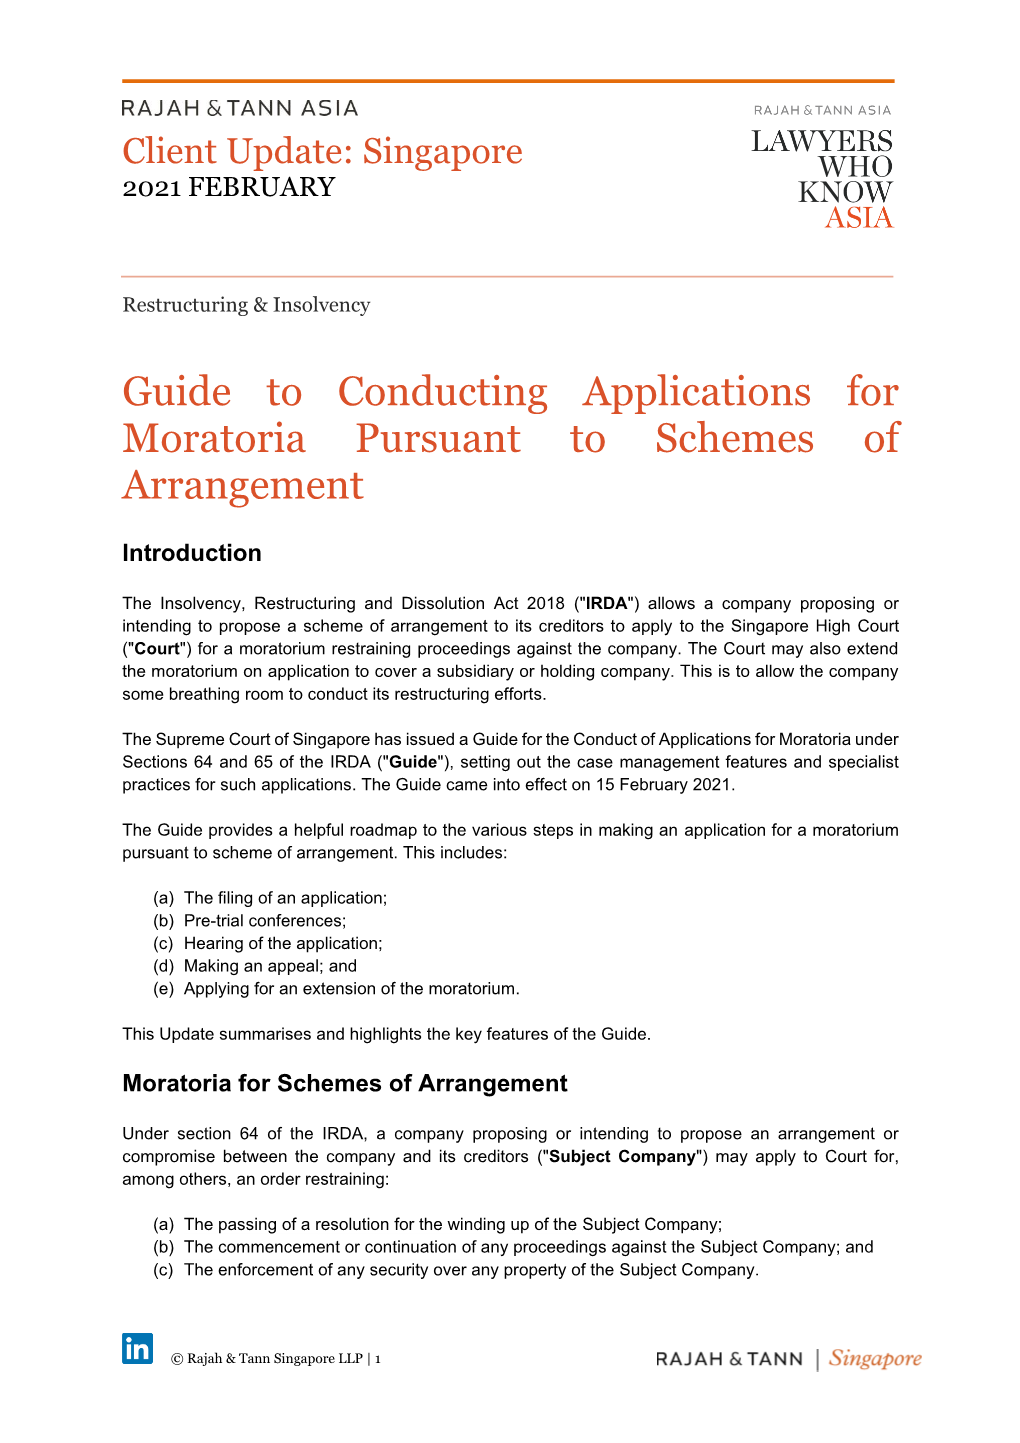 Guide to Conducting Applications for Moratoria Pursuant to Schemes of Arrangement